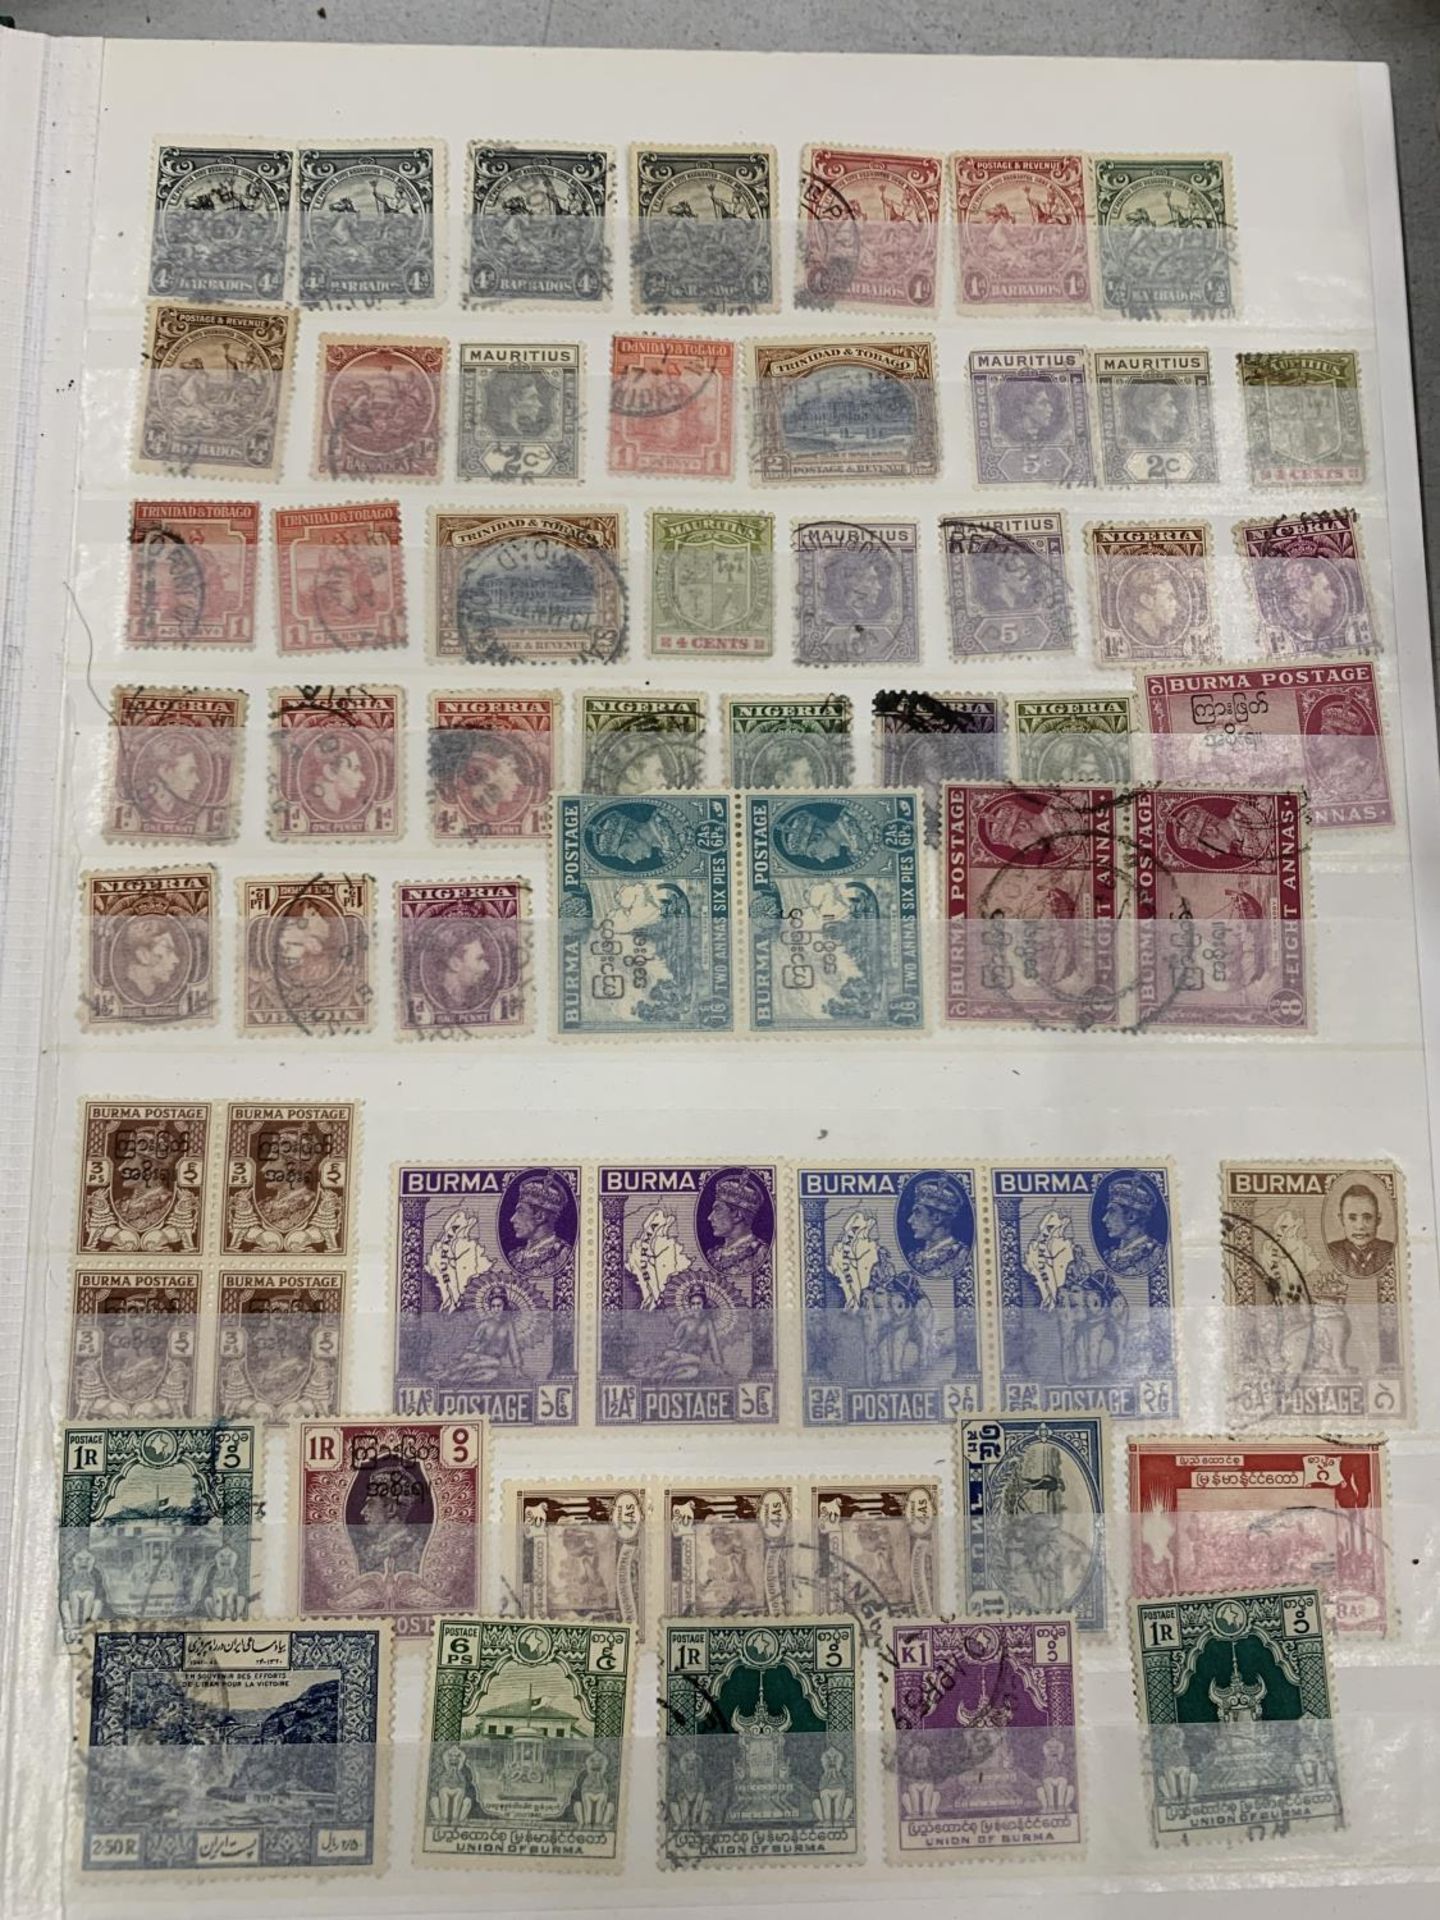 A STAMP ALBUM FROM THE 1900'S WITH VARIOUS COUNTRIES STAMPS - Image 3 of 3